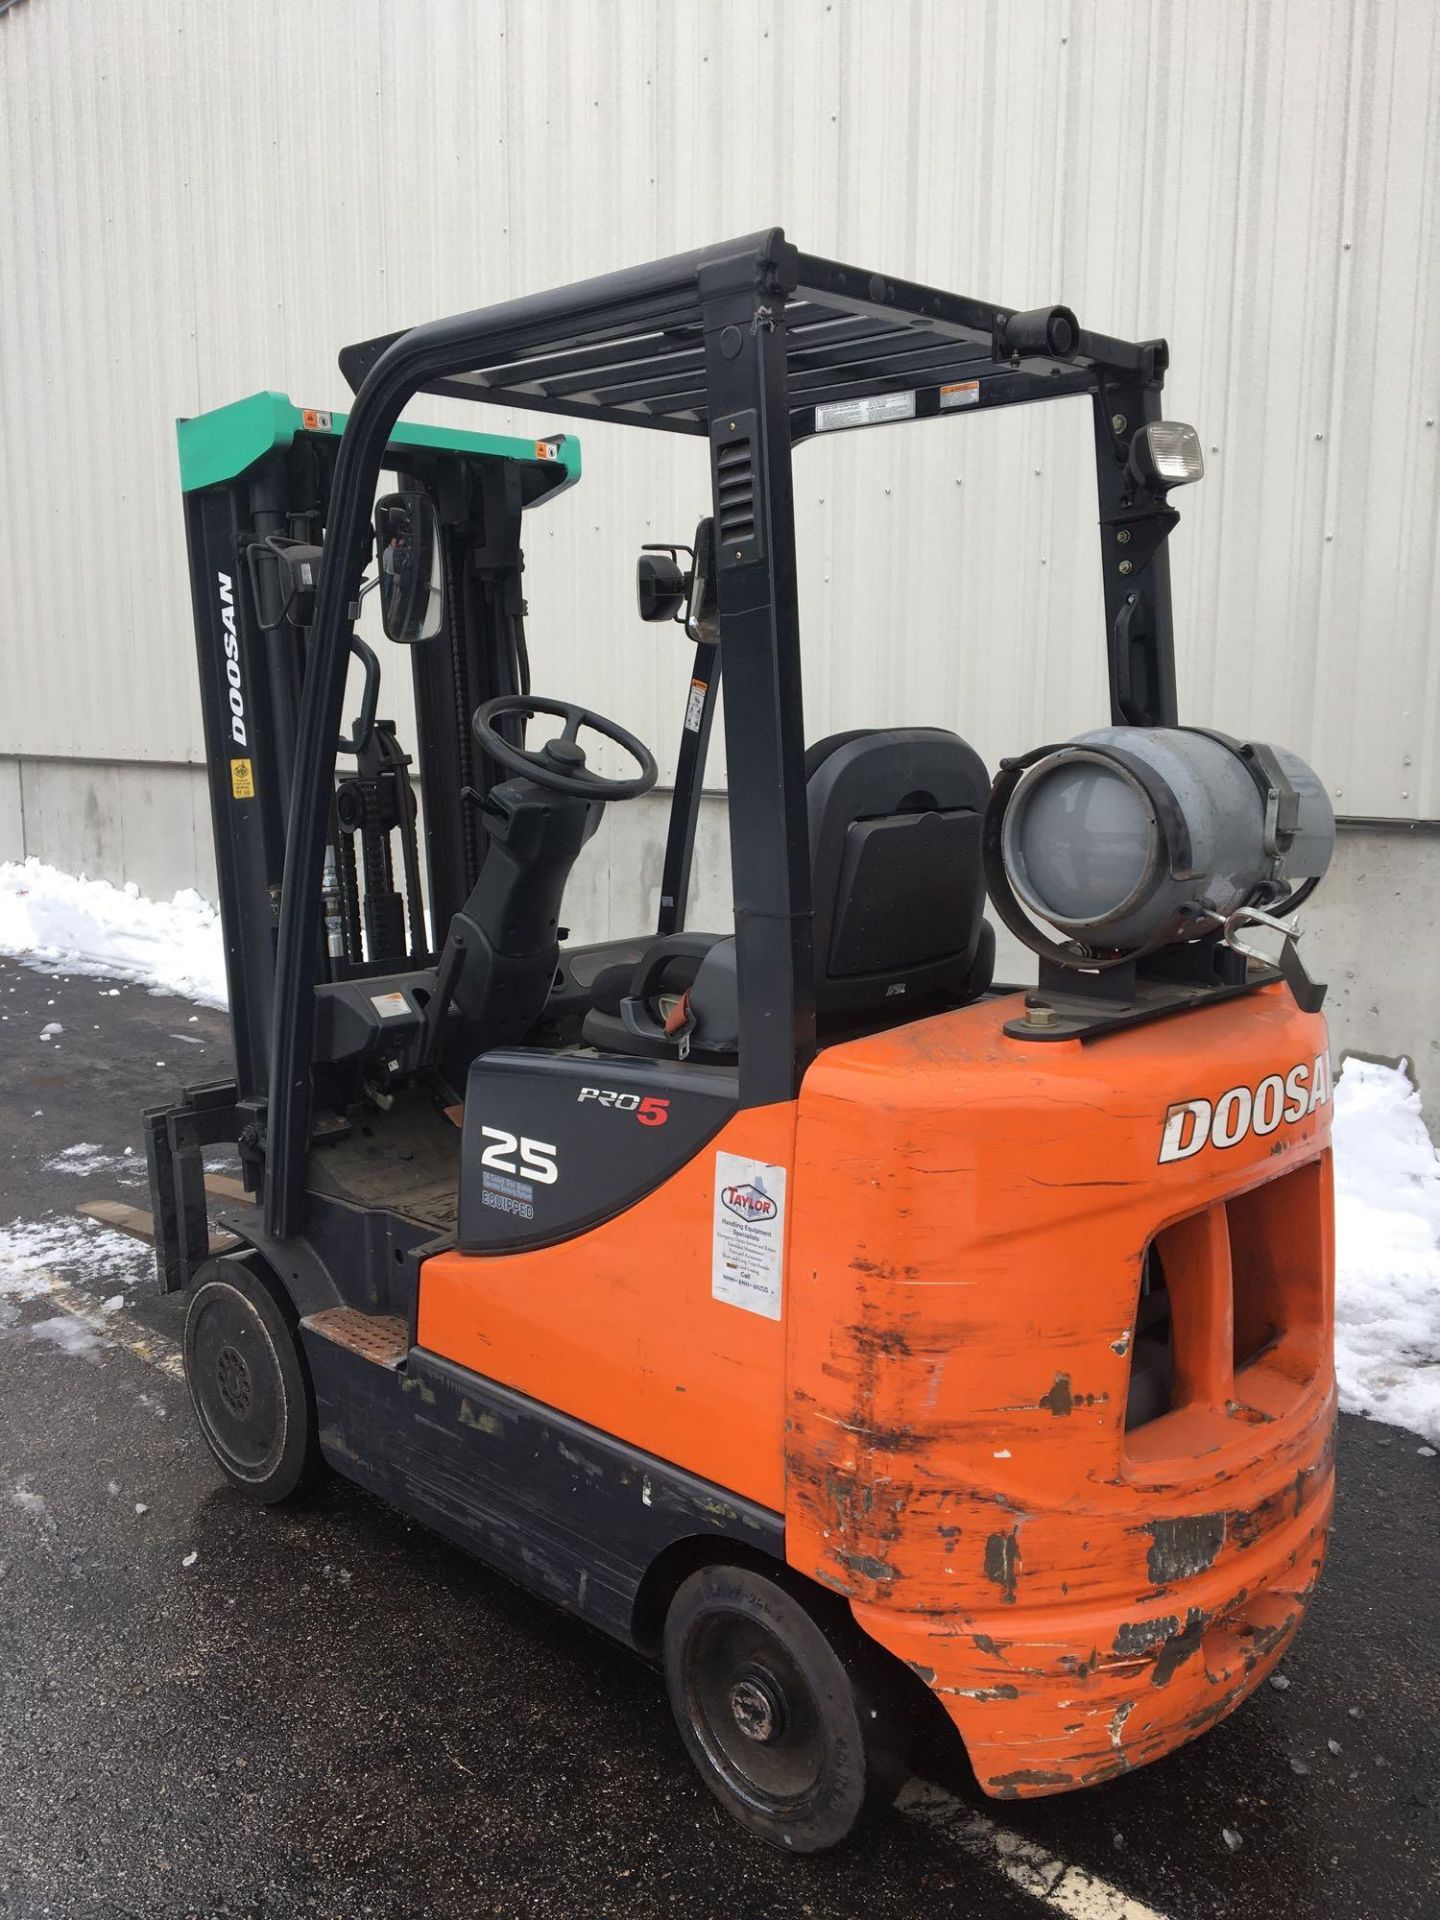 Propane Forklift, Doosan, GC25P-5, Max Ht 189", Max Cap 4300lbs, Hrs 3081 Started and Moved - Image 2 of 11